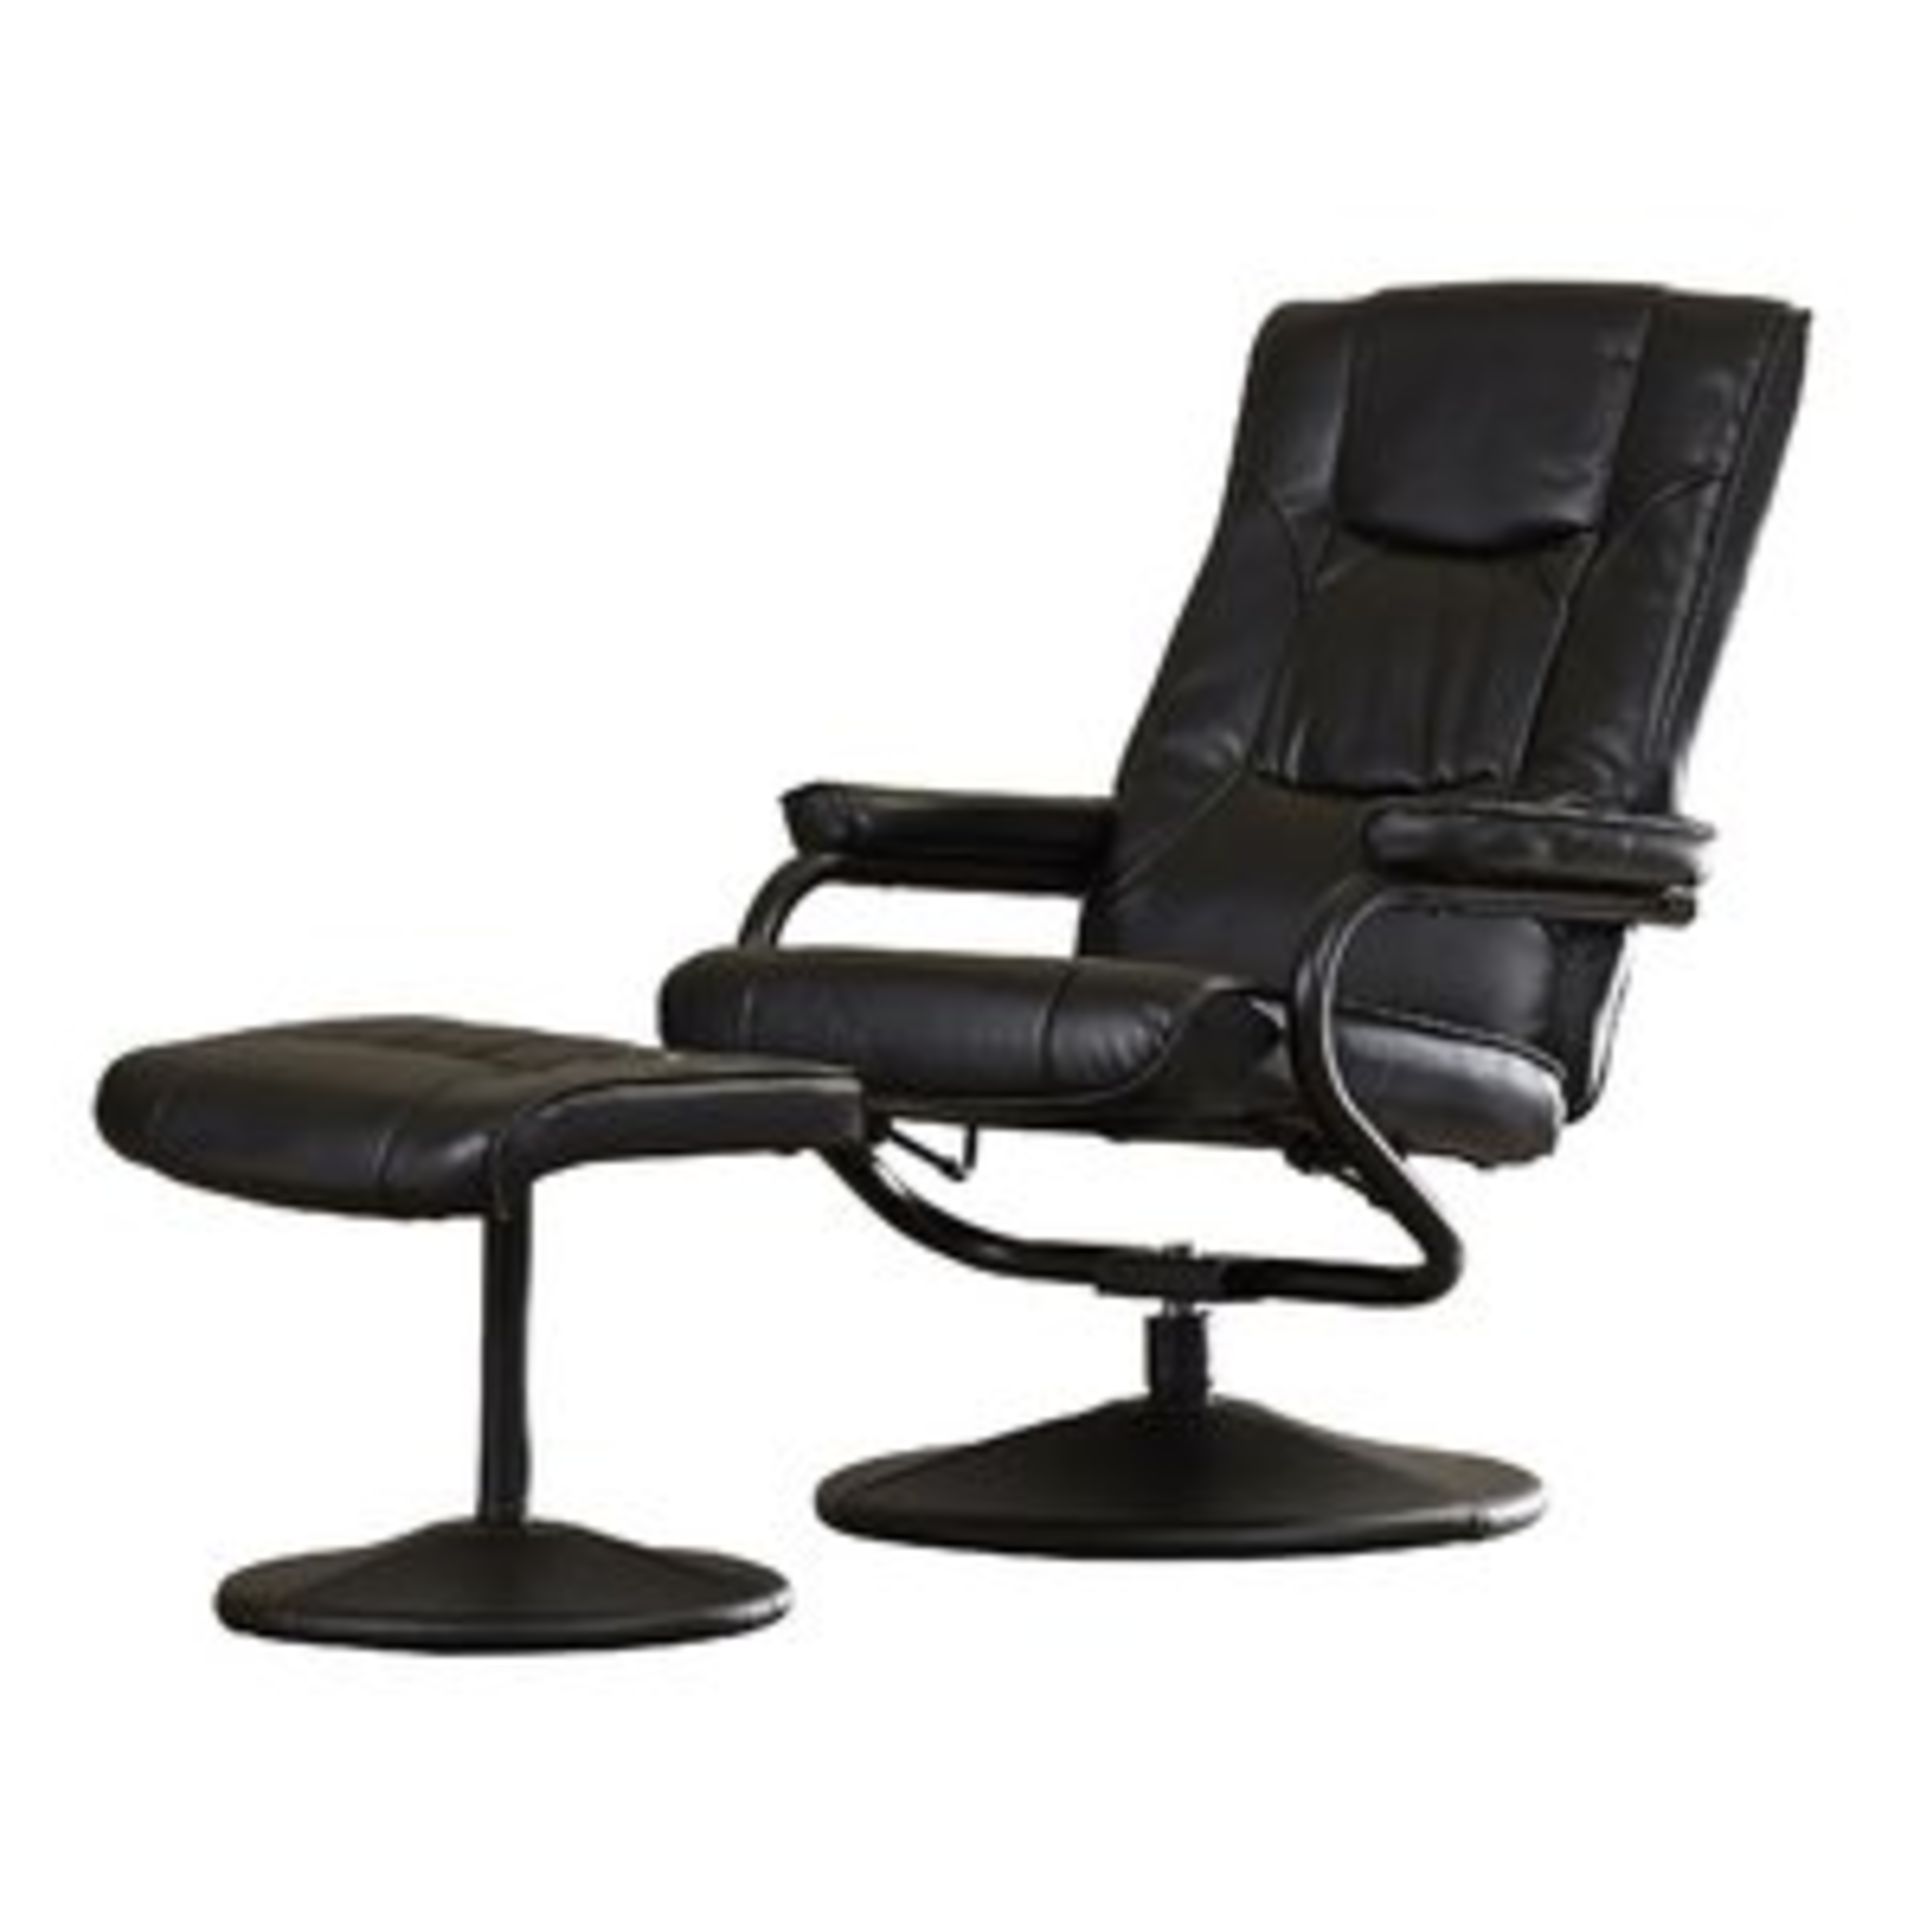 V Grade A Electric Swivel Massage Chair with Footstool (Item is similar to image) Store Price £149.